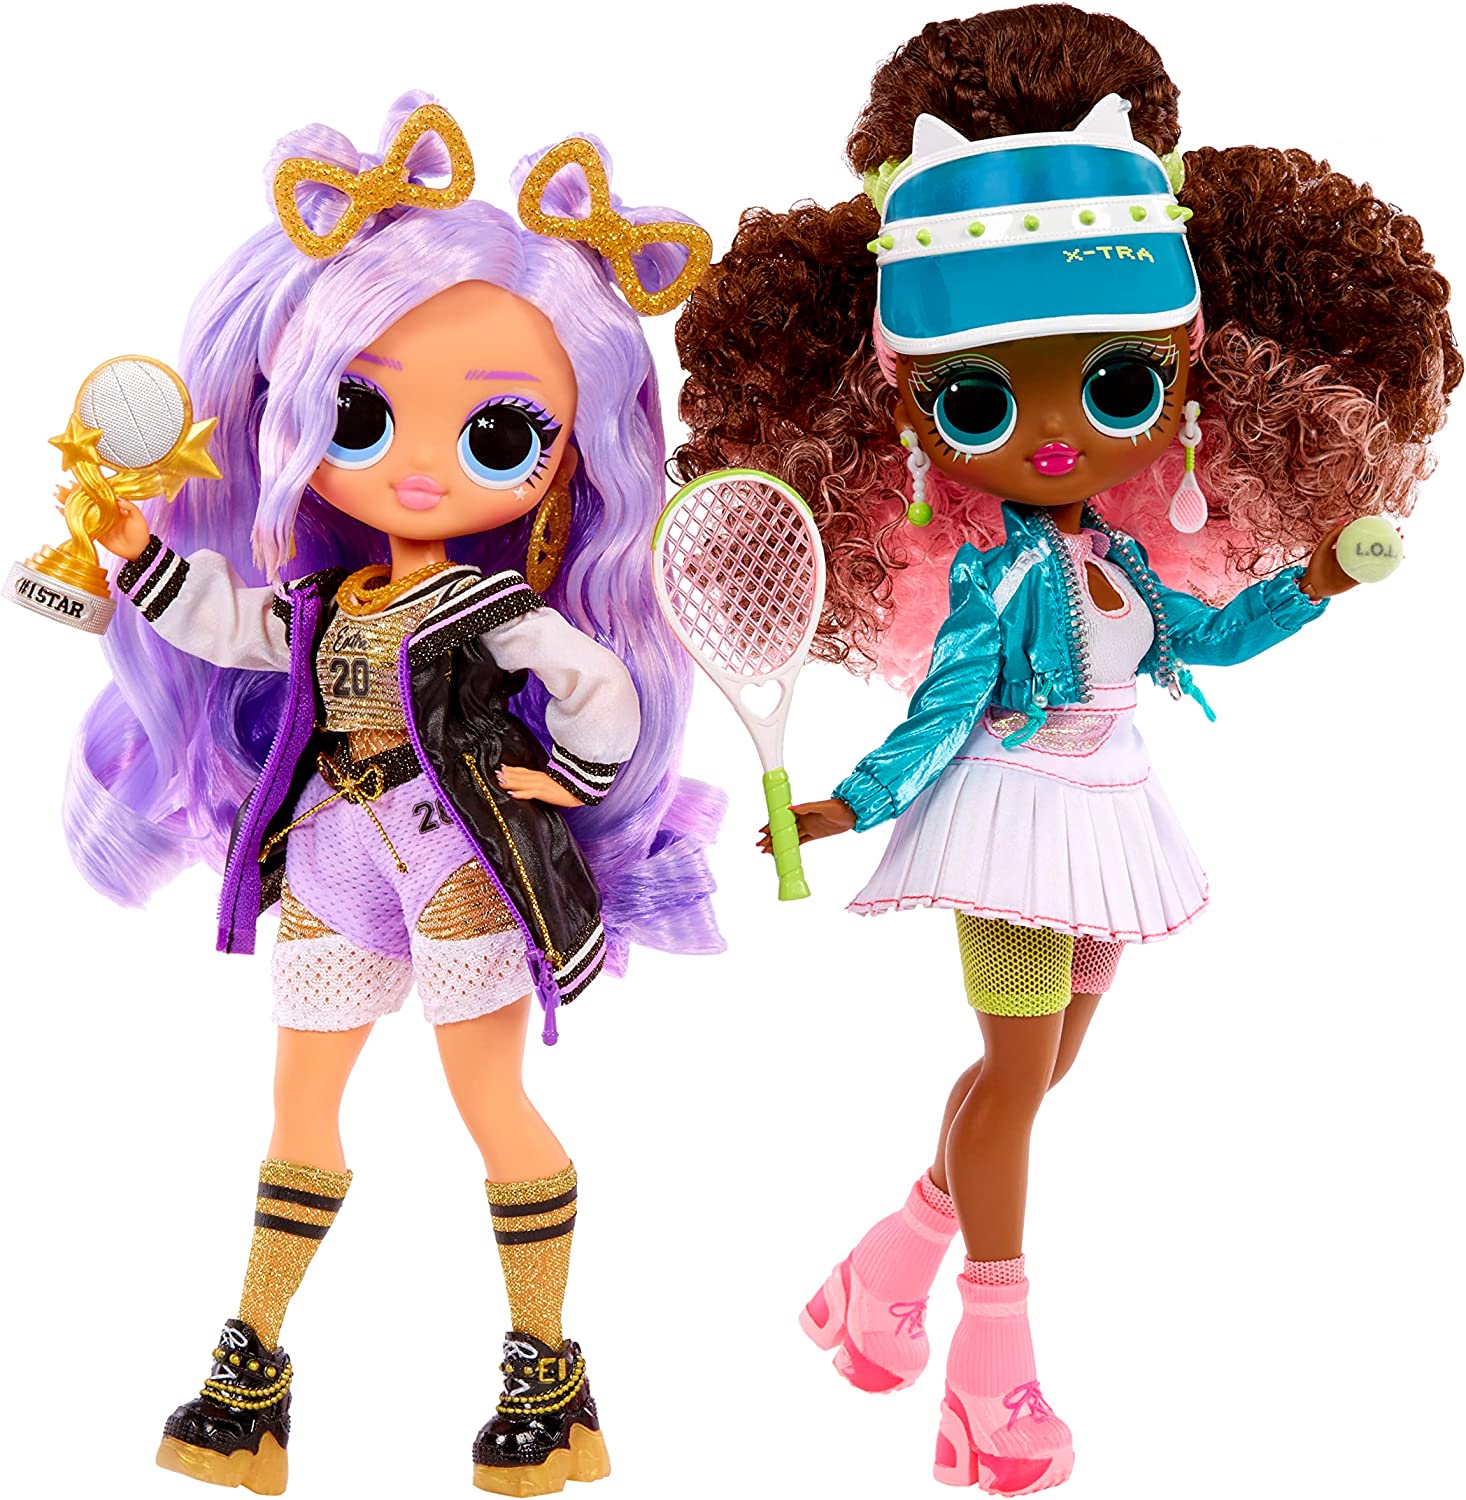 LOL OMG Sports series 3 dolls: Sparkle Star and Court Cutie 